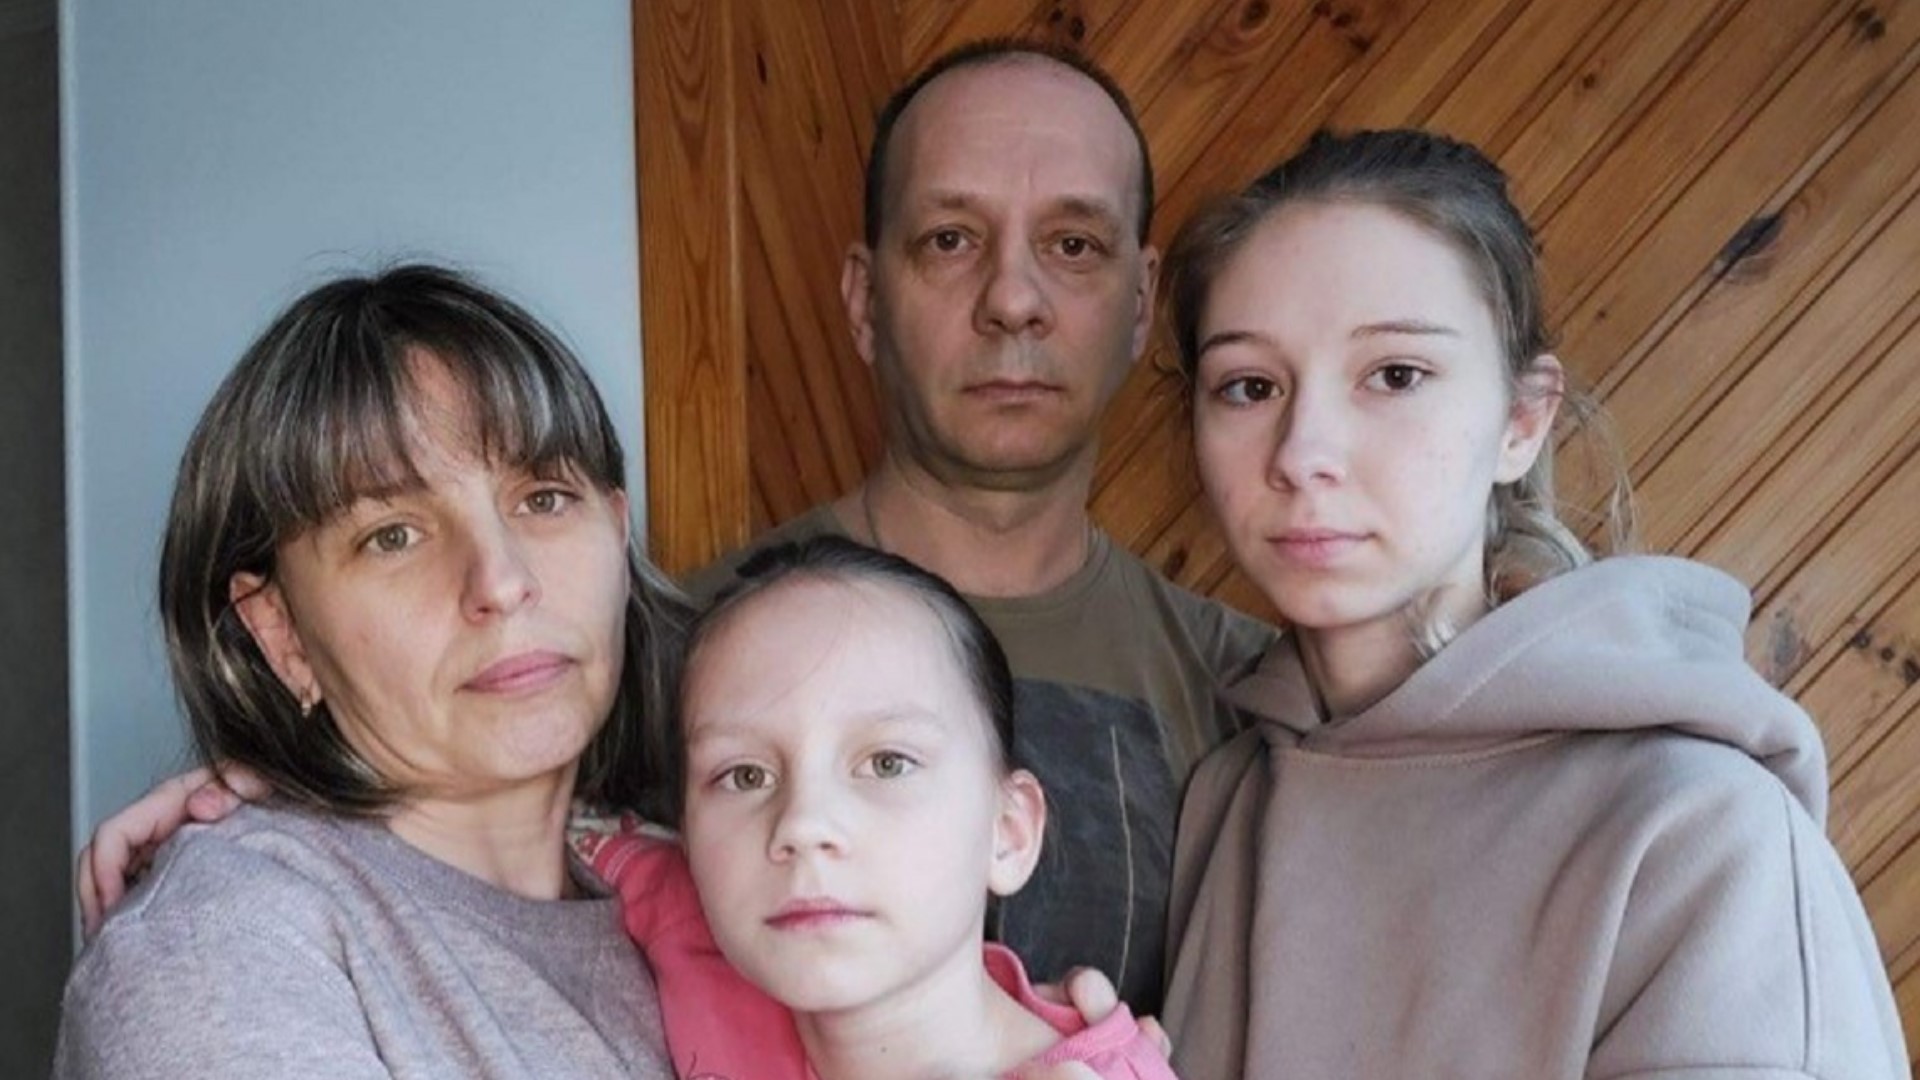 A Ukrainian woman who once lived in Greensboro is getting some help to leave Ukraine from her old neighbors.